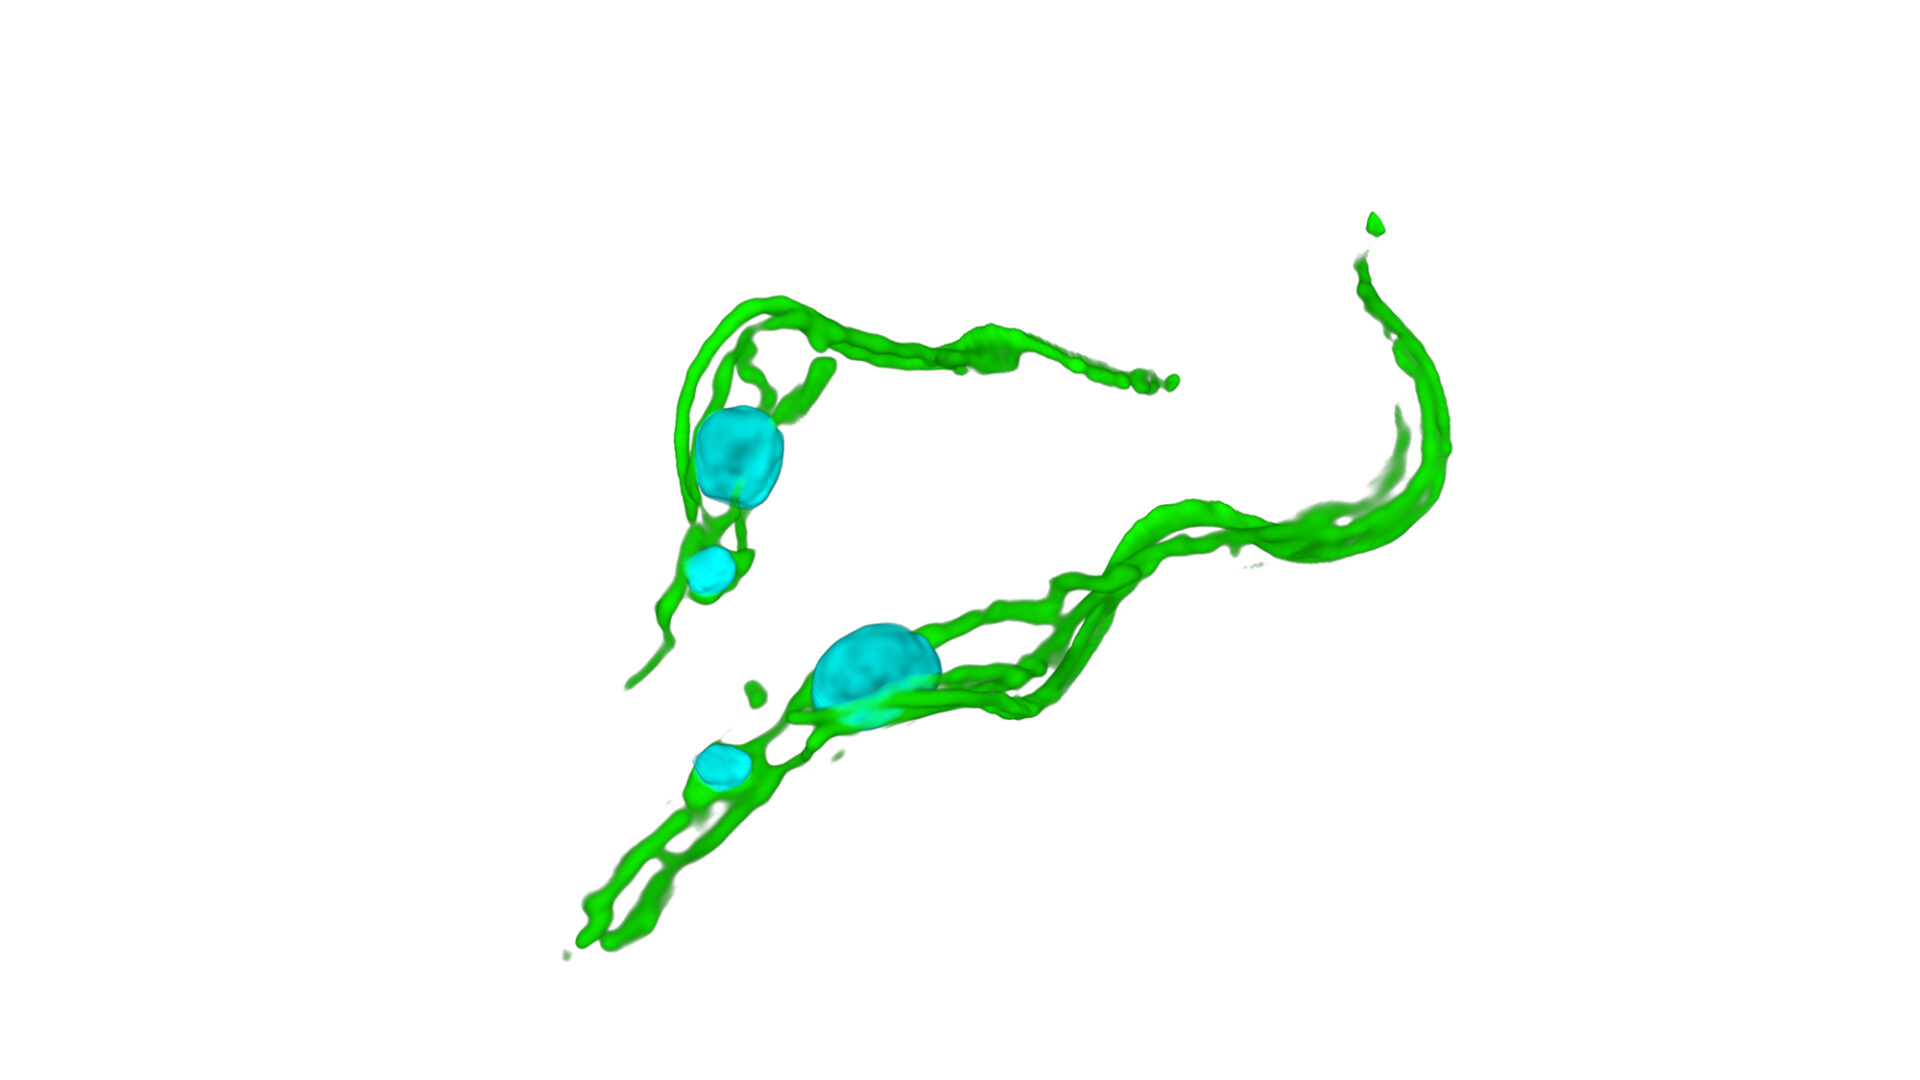 Image: Microscope image that shows the parasite, Trypanosoma brucei. Two strings of lime green blob lines show bulbs of light blue in them. The area colored in blue represents the DNA—the larger one is the nucleus, and the smaller one is mitochondrial DNA.